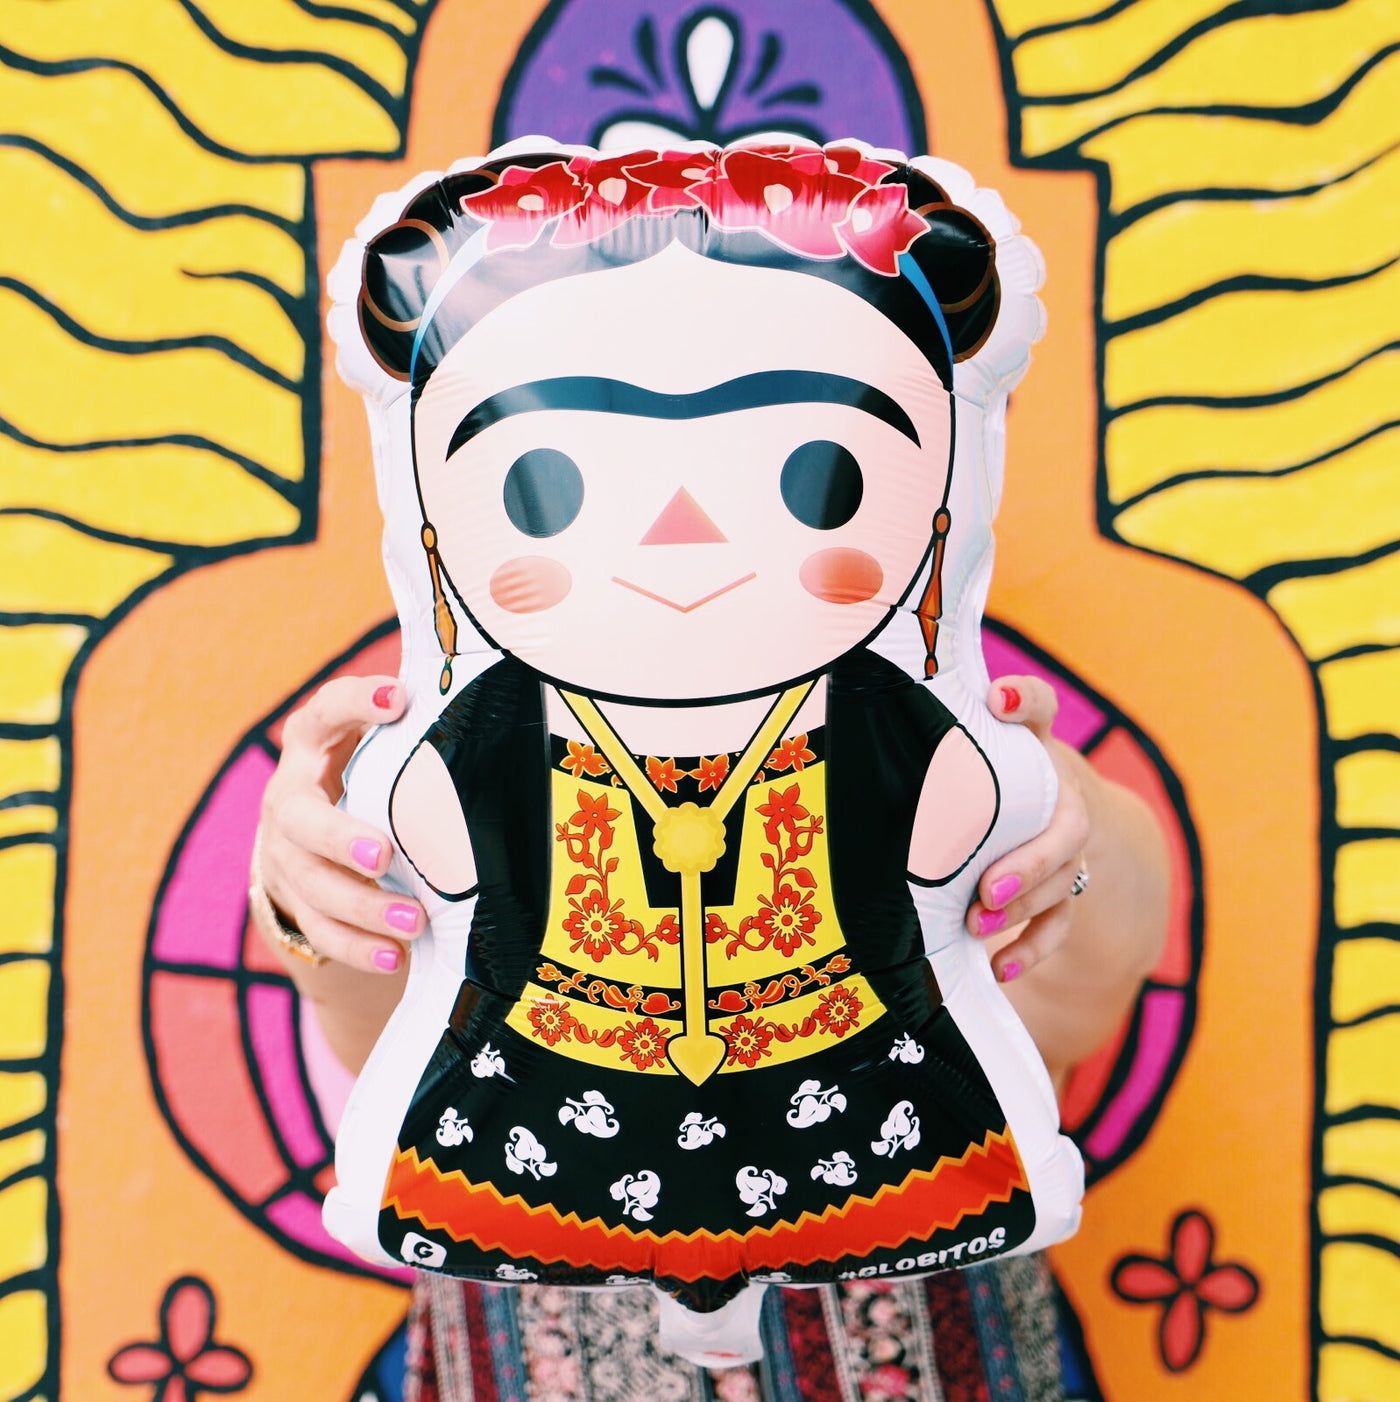 Frida Kahlo balloon photographed in front of Artelexia's, "You Are Radiant" mural. Frida has a Maria doll style appearance. Main colors featured are red, black, and yellow. Frida wears a red flower crown and traditional dress.